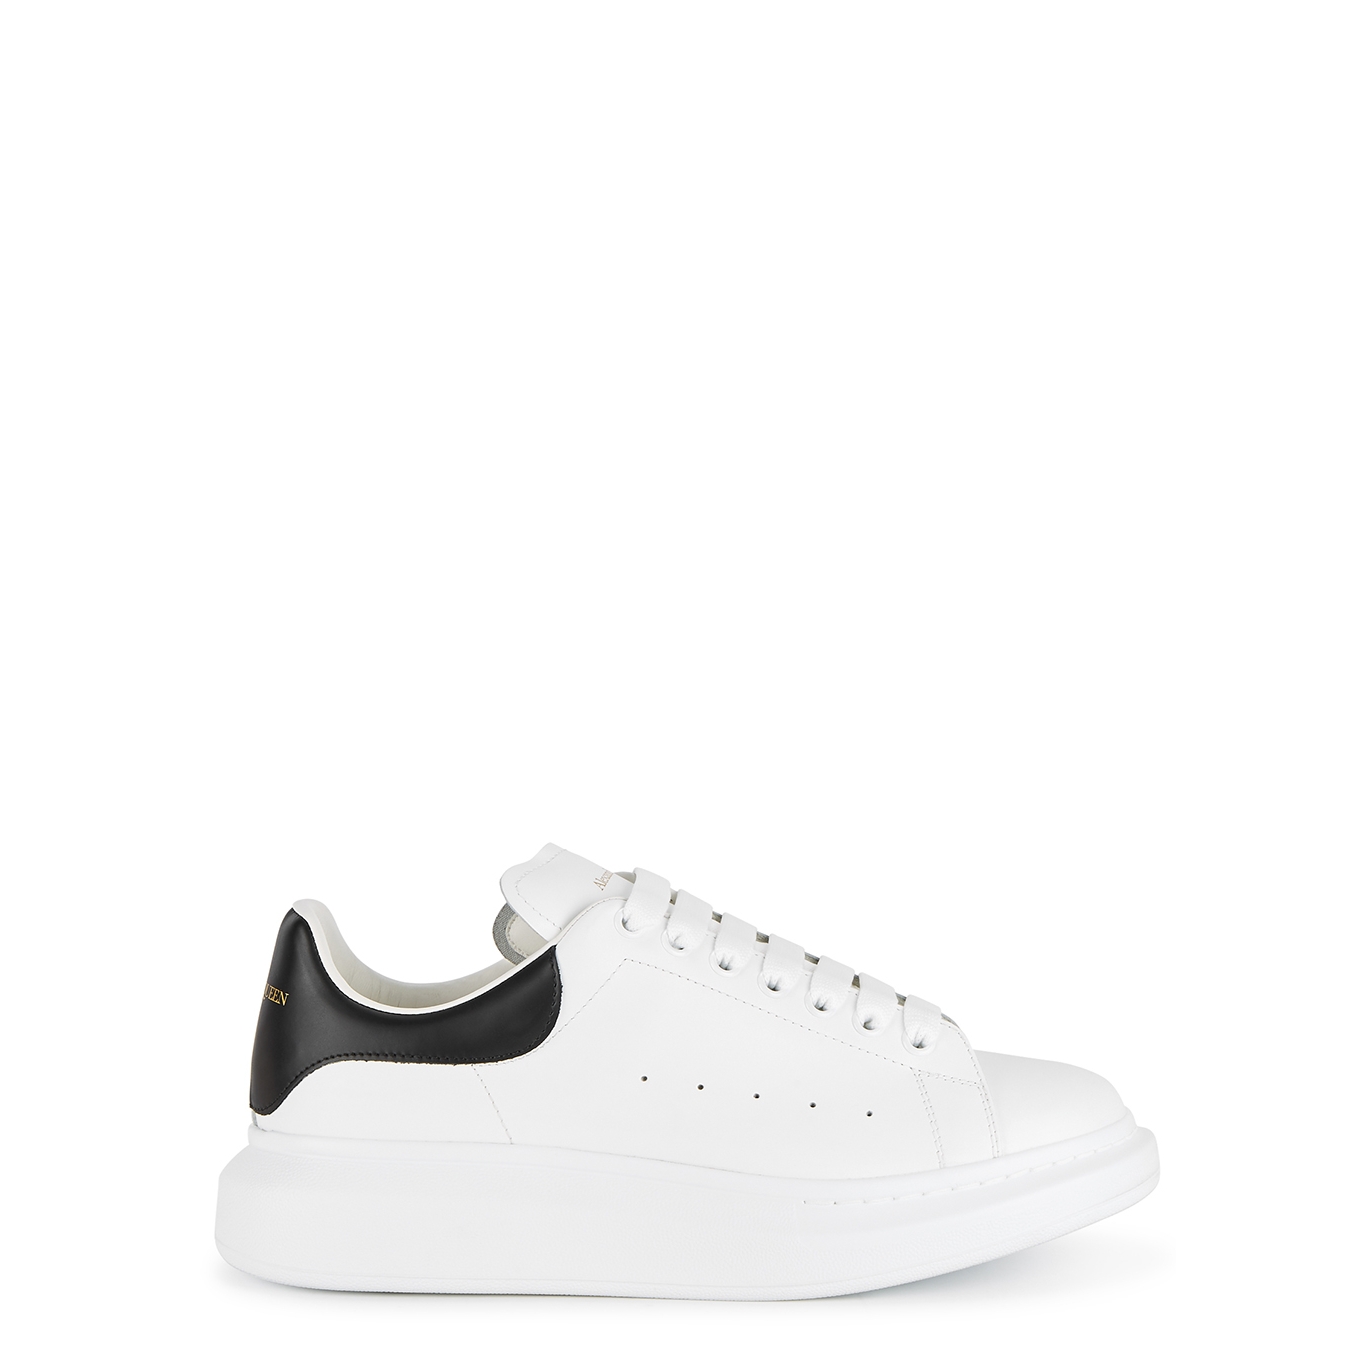 Alexander McQueen Oversized White Leather Sneakers - White And Black - 6.5